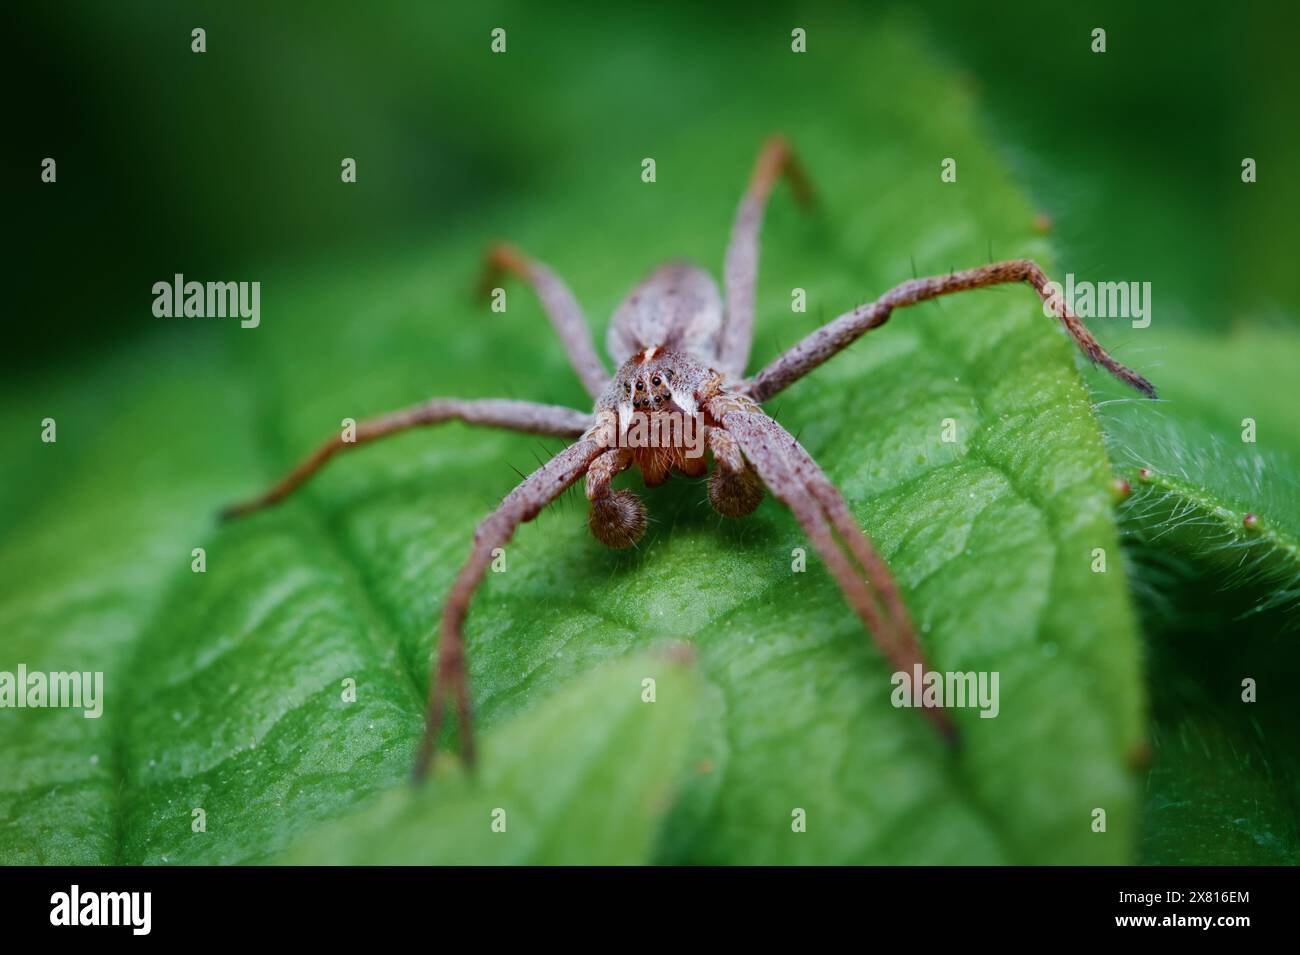 Macro Front View Portrait Of A Female Nursery Web Spider, Pisaura mirabilis, Resting On A Leaf Showing Eyes, Fangs And Large Front Palps, New Forest U Stock Photo